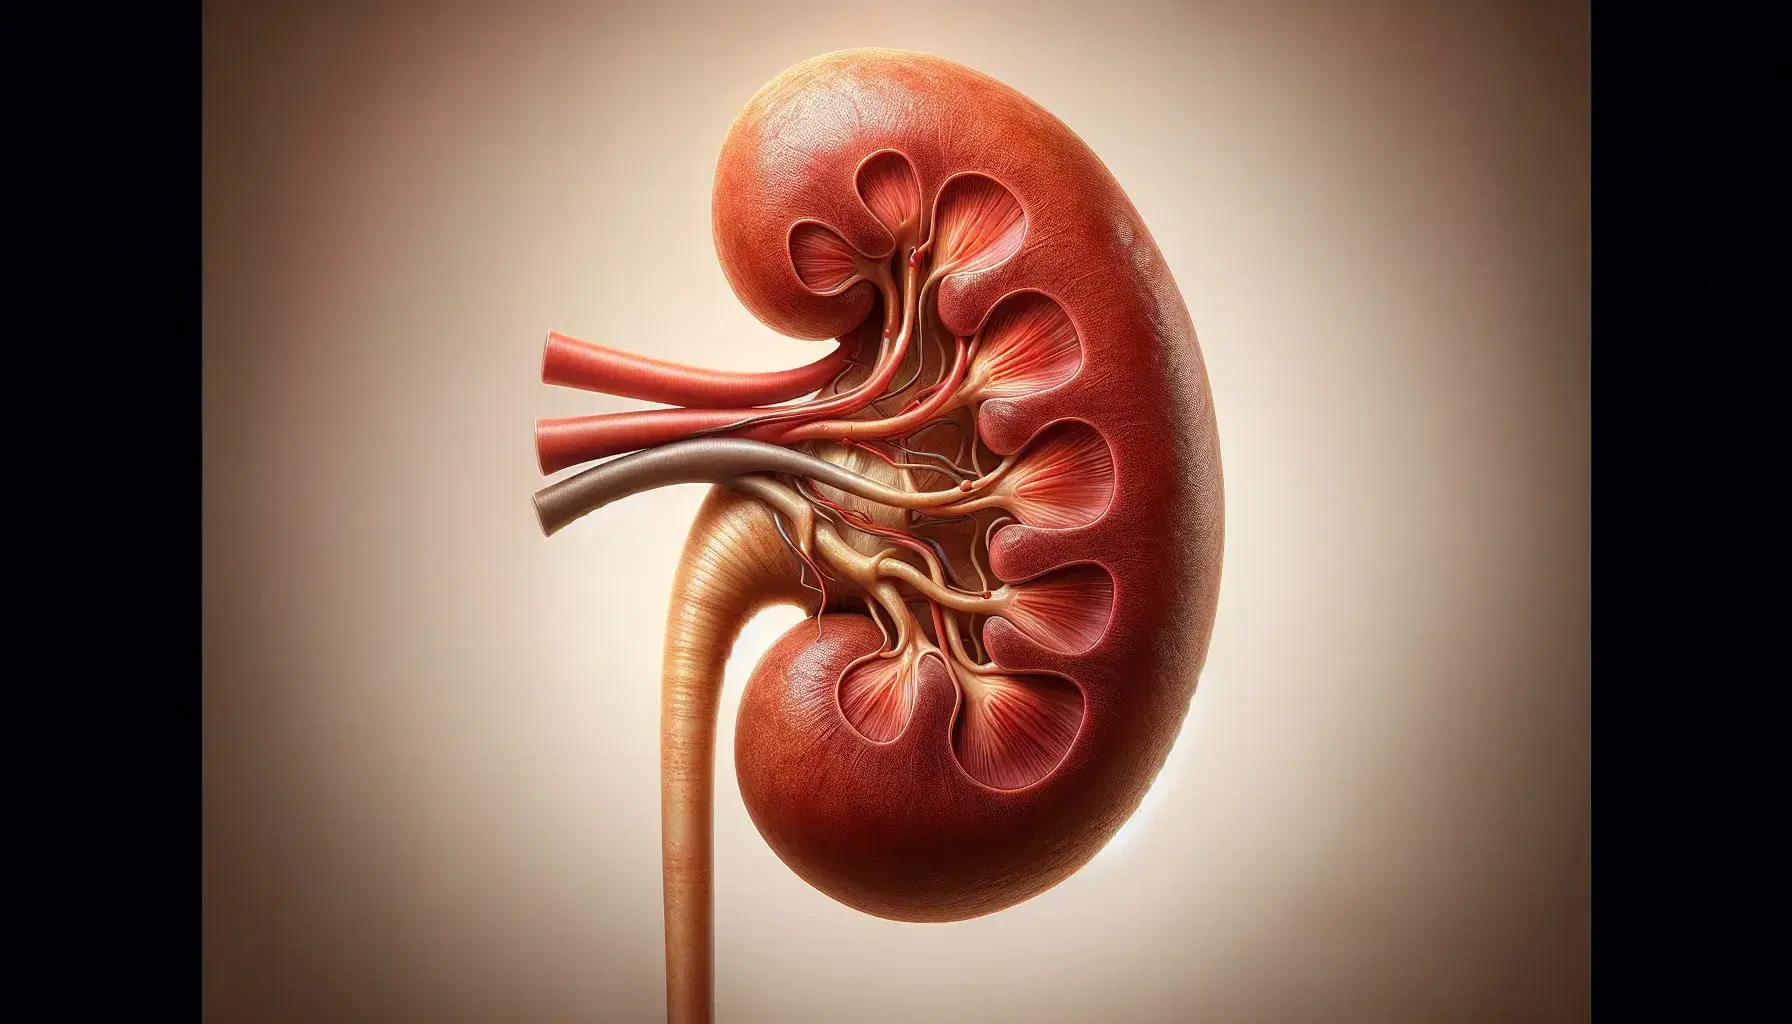 Human kidney with adrenal gland, renal artery, vein, and ureter, depicted in anatomical detail against a light background, highlighting the organ's structure.